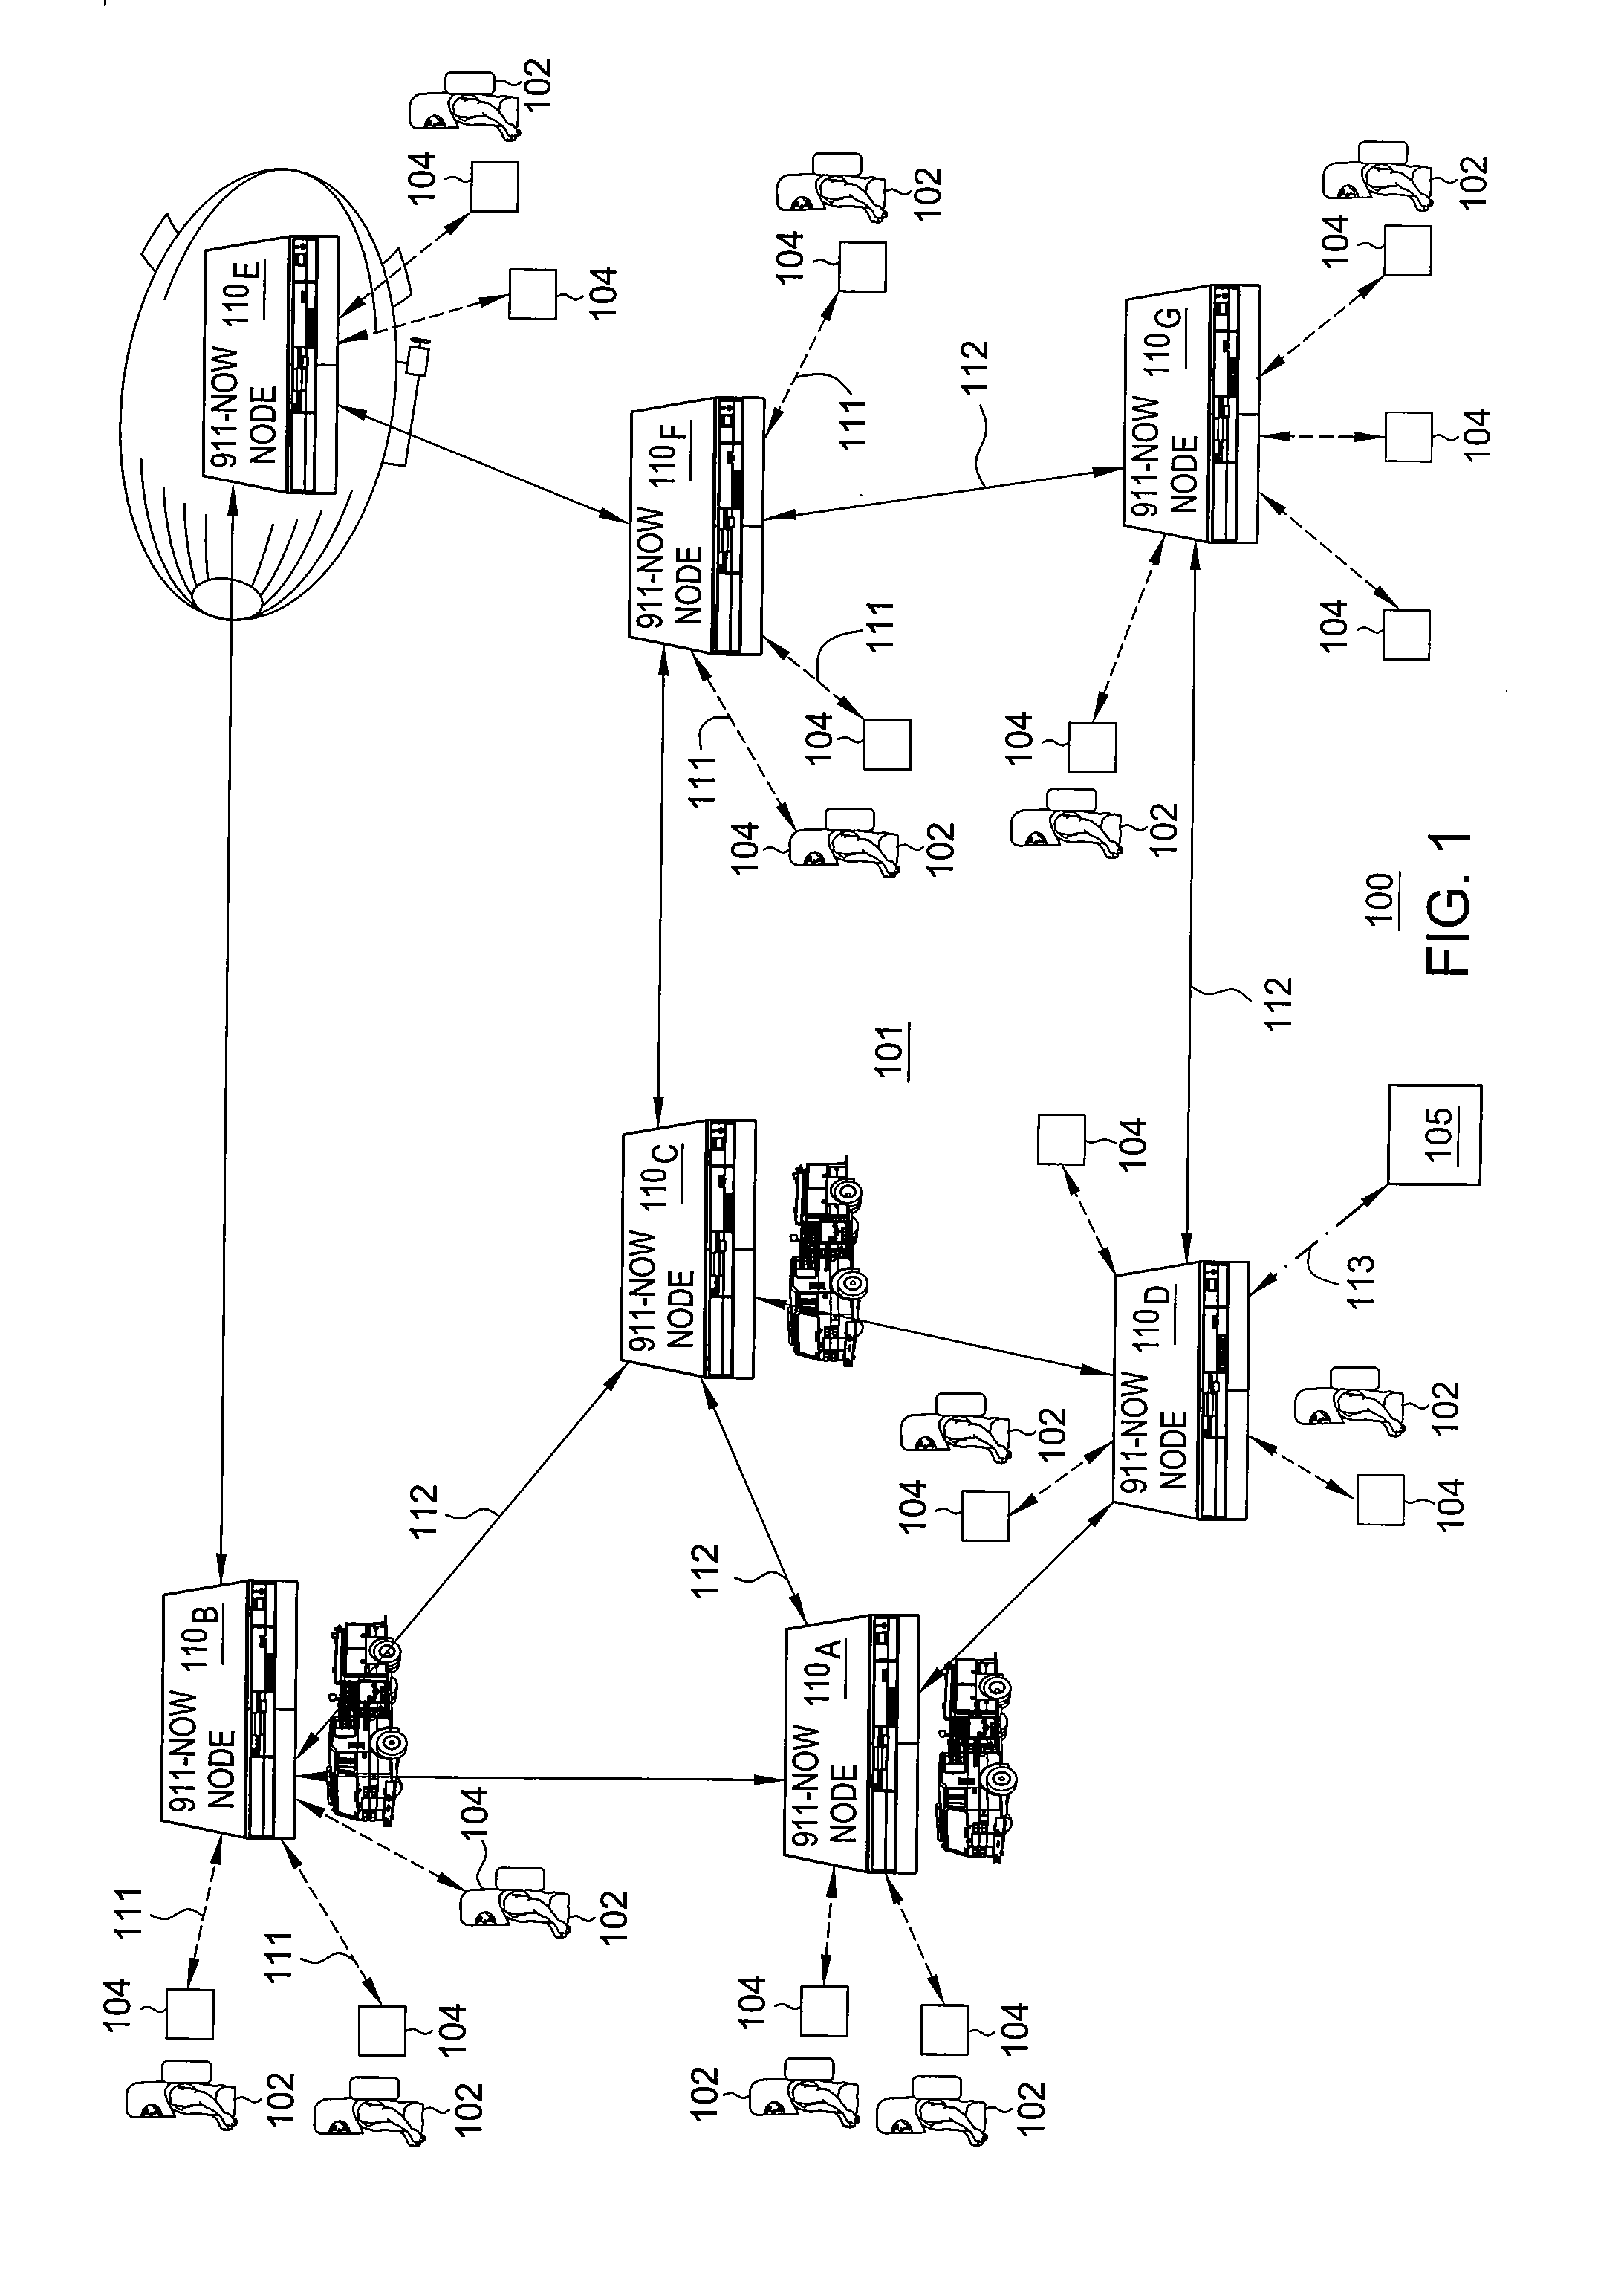 Apparatus and Method for Providing a Rapidly Deployable Wireless Network